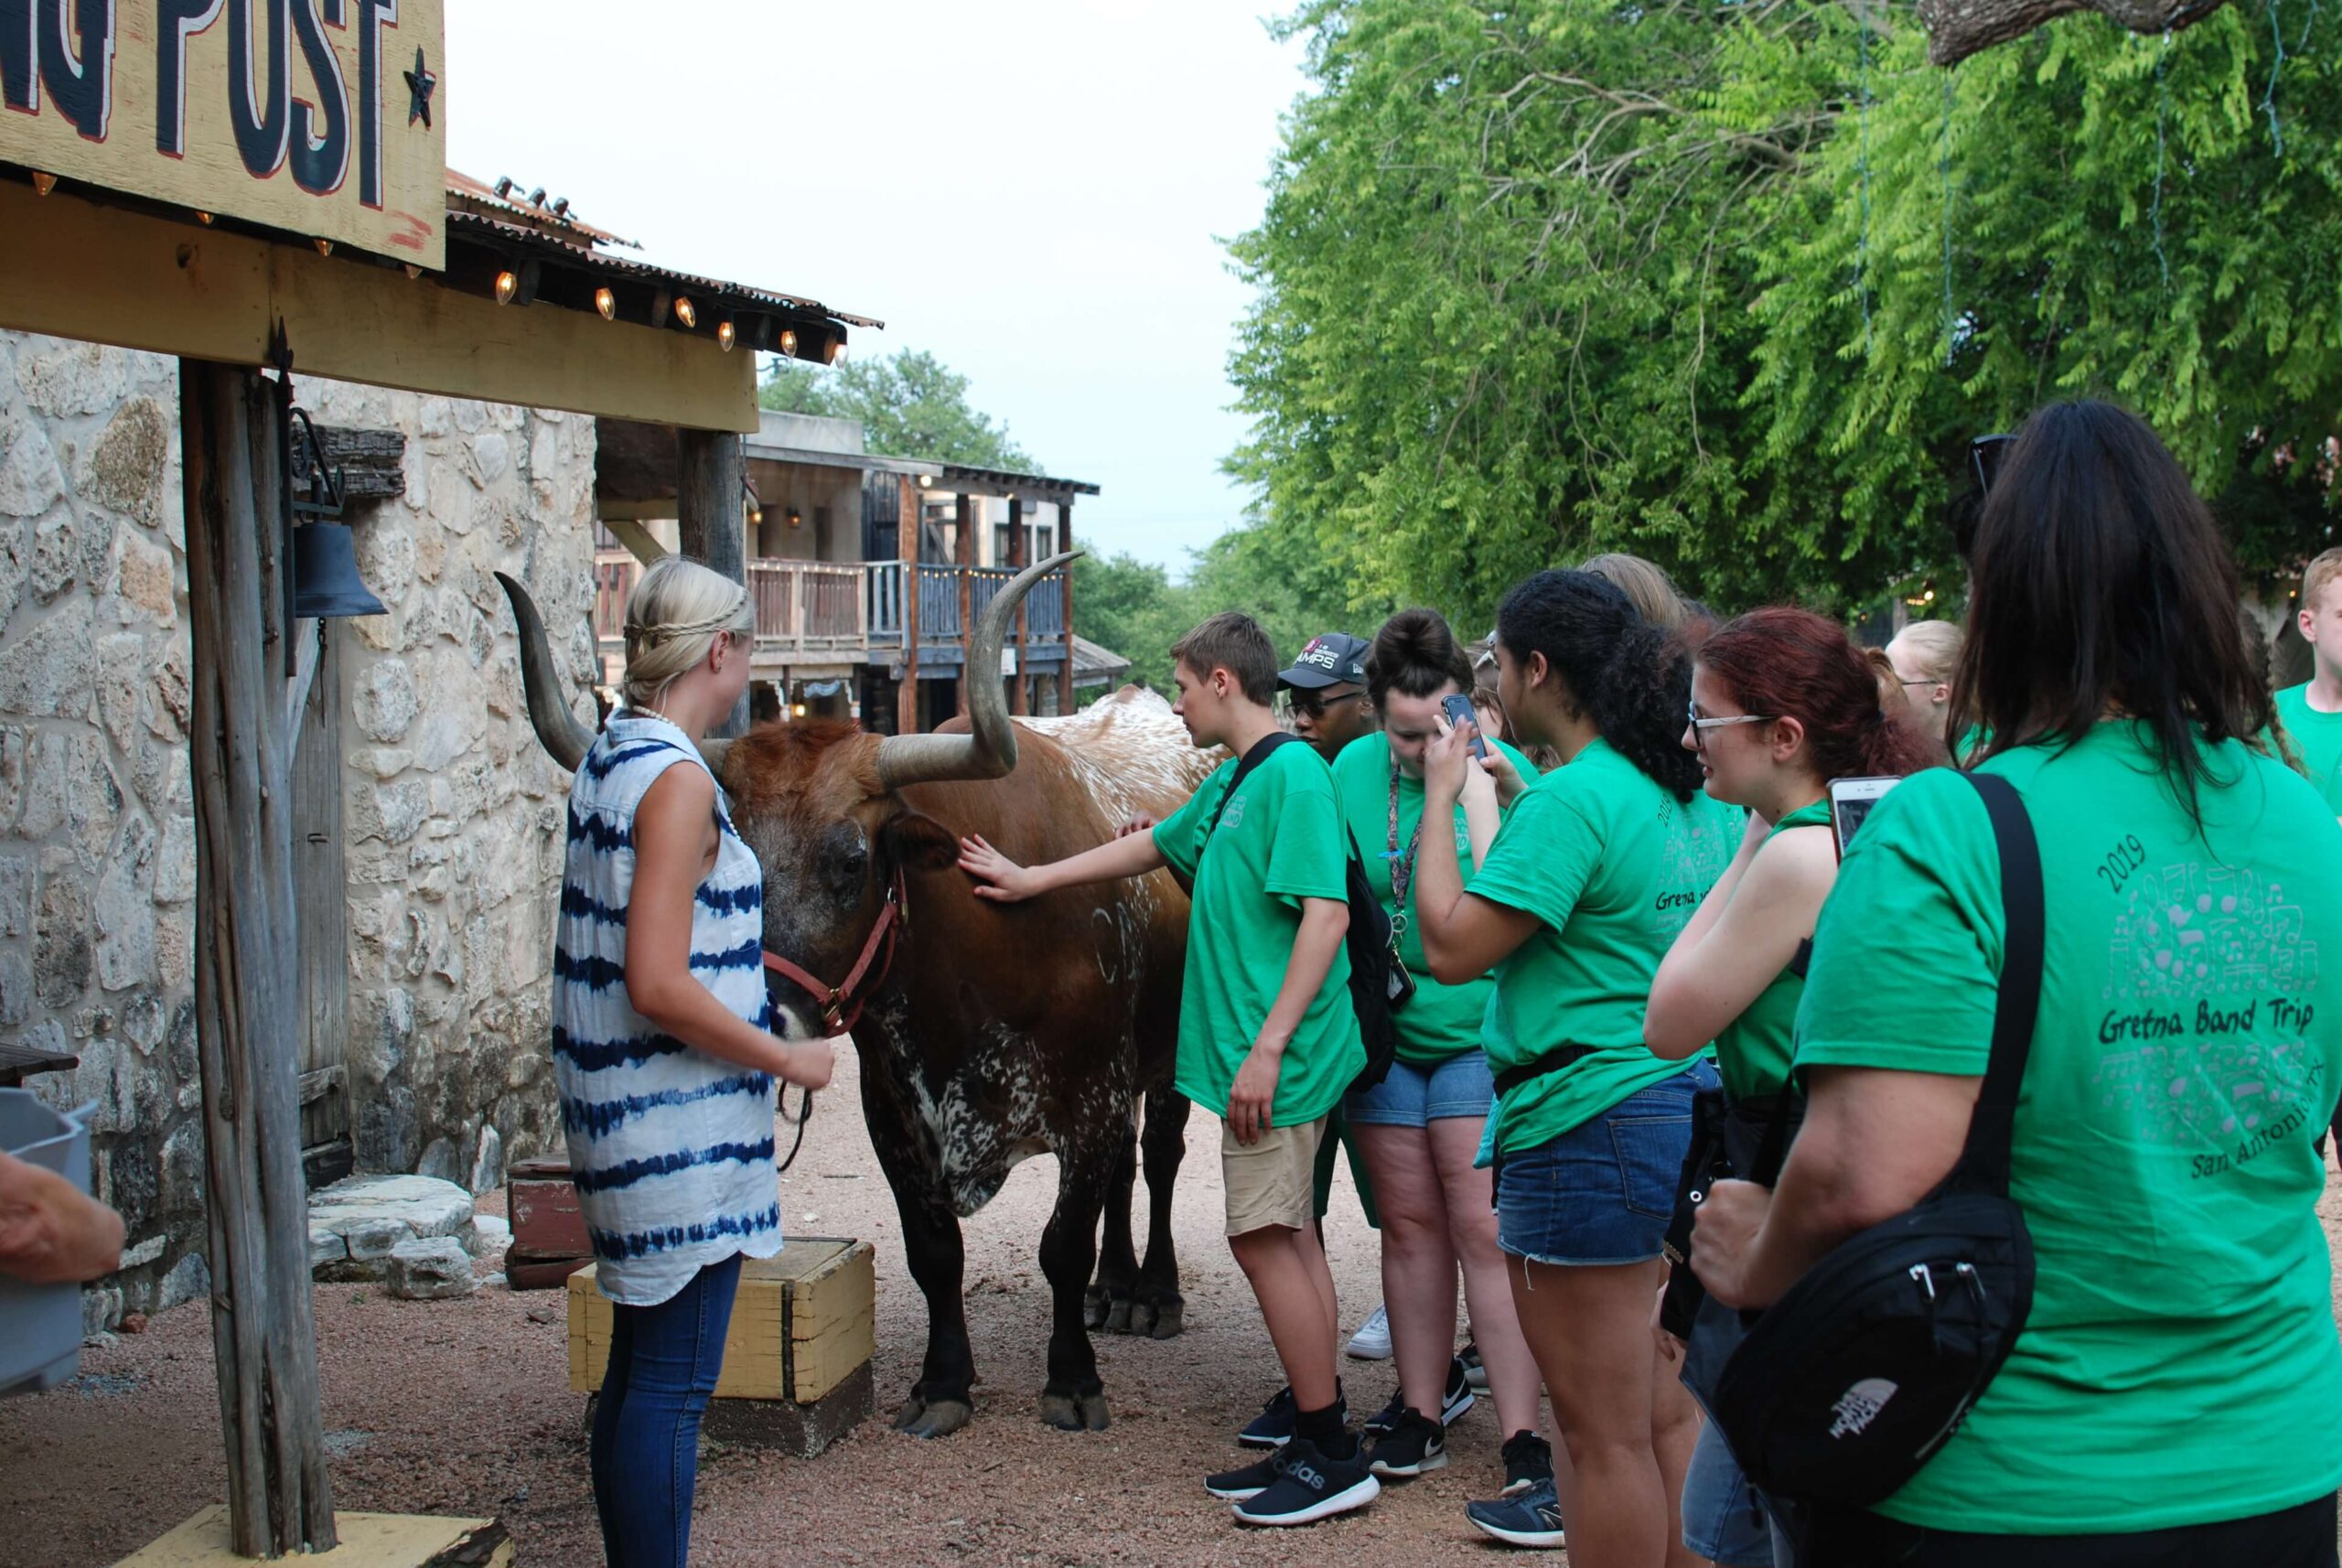 Meet and Greet with Woodrow the Texas Longhorn